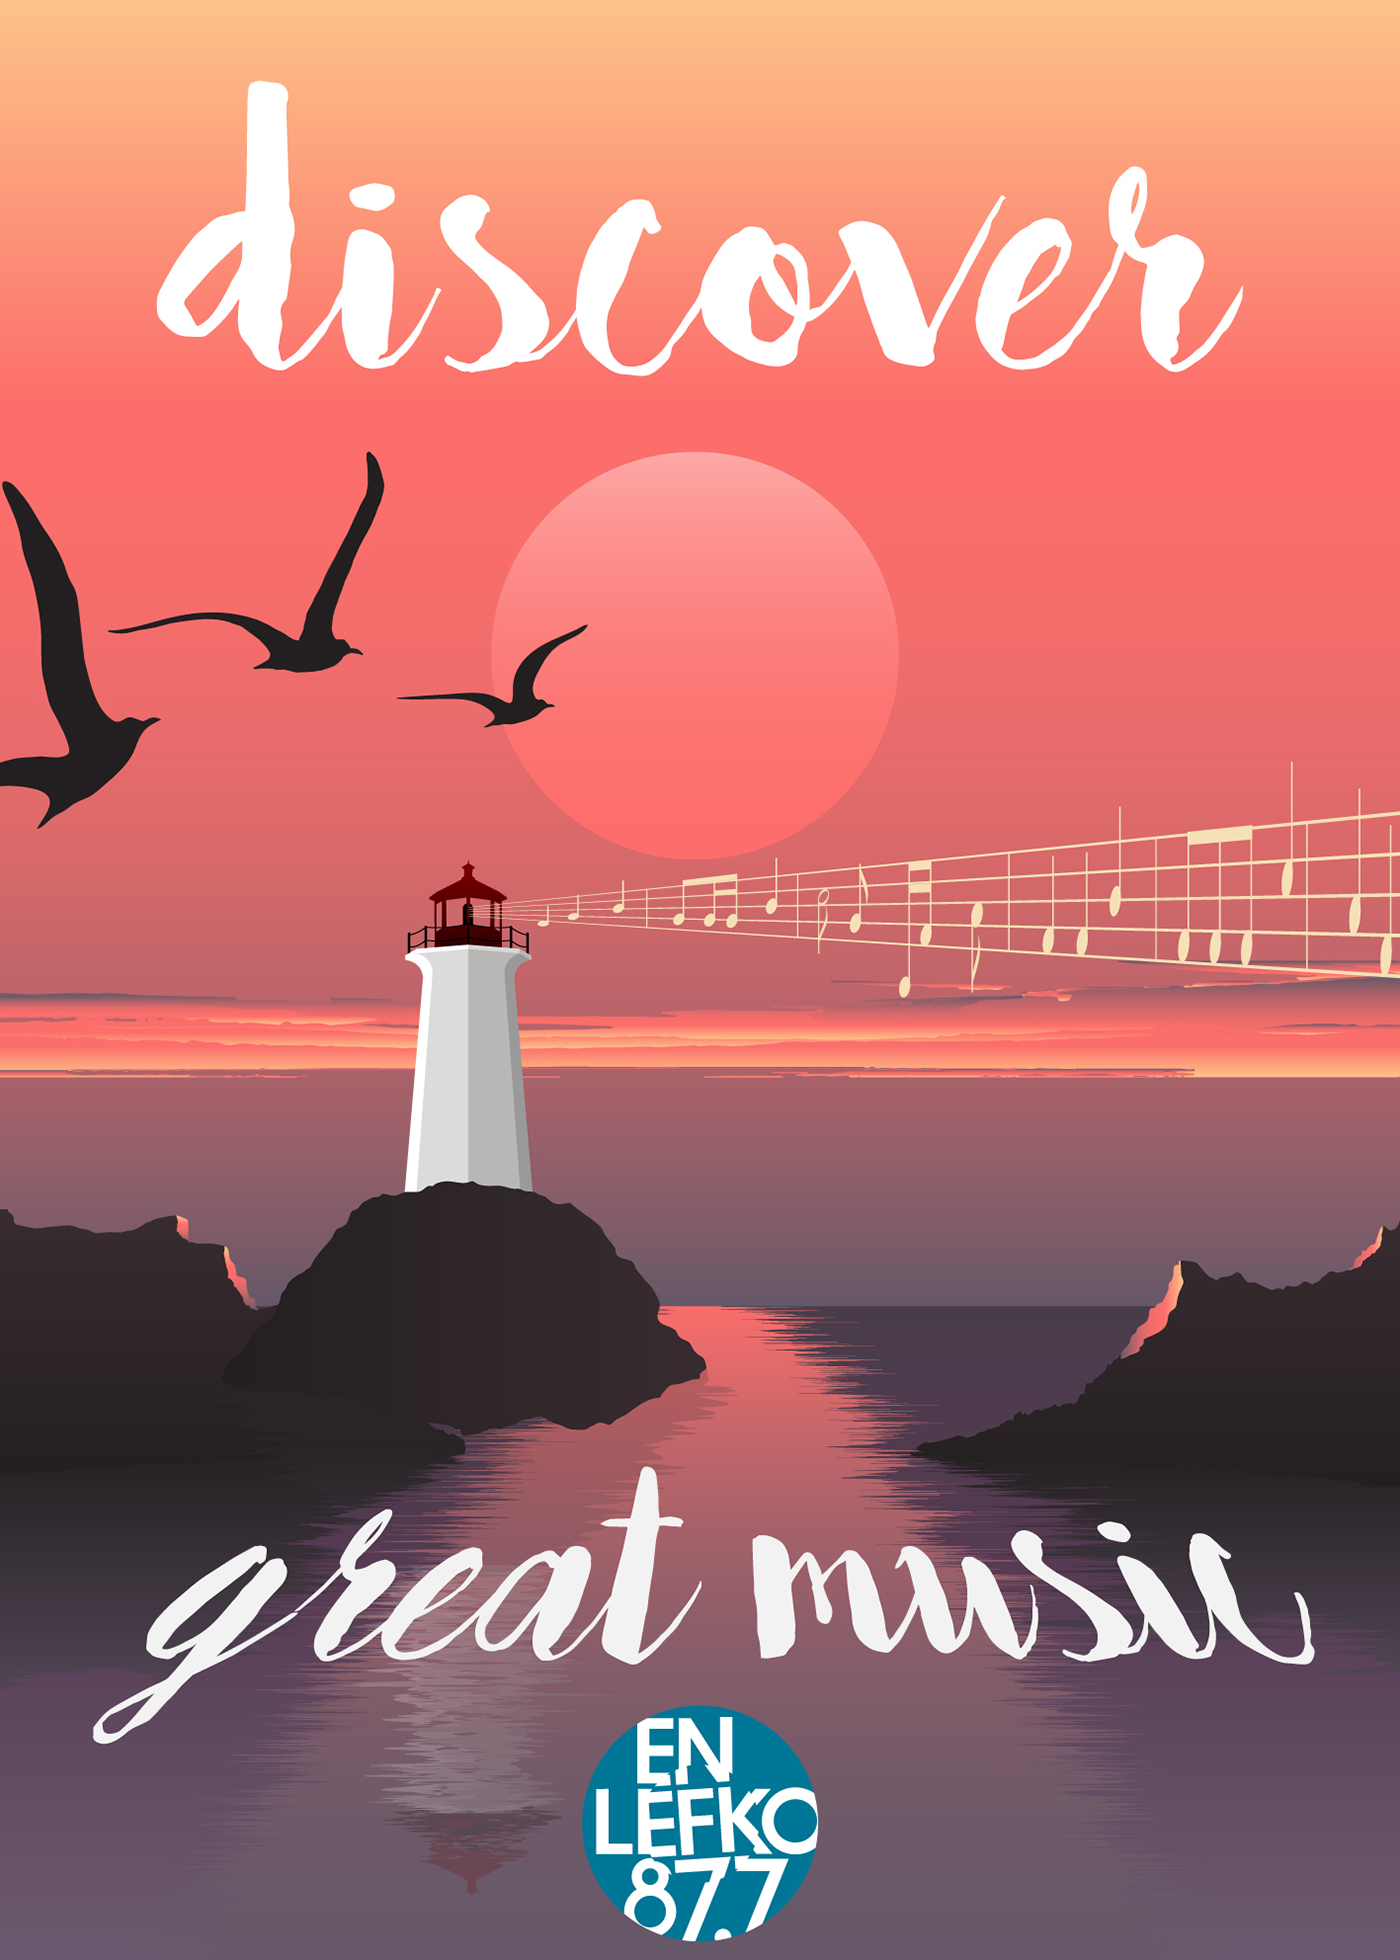 en lefko discover great music Radio Space  lighthouse compass akto